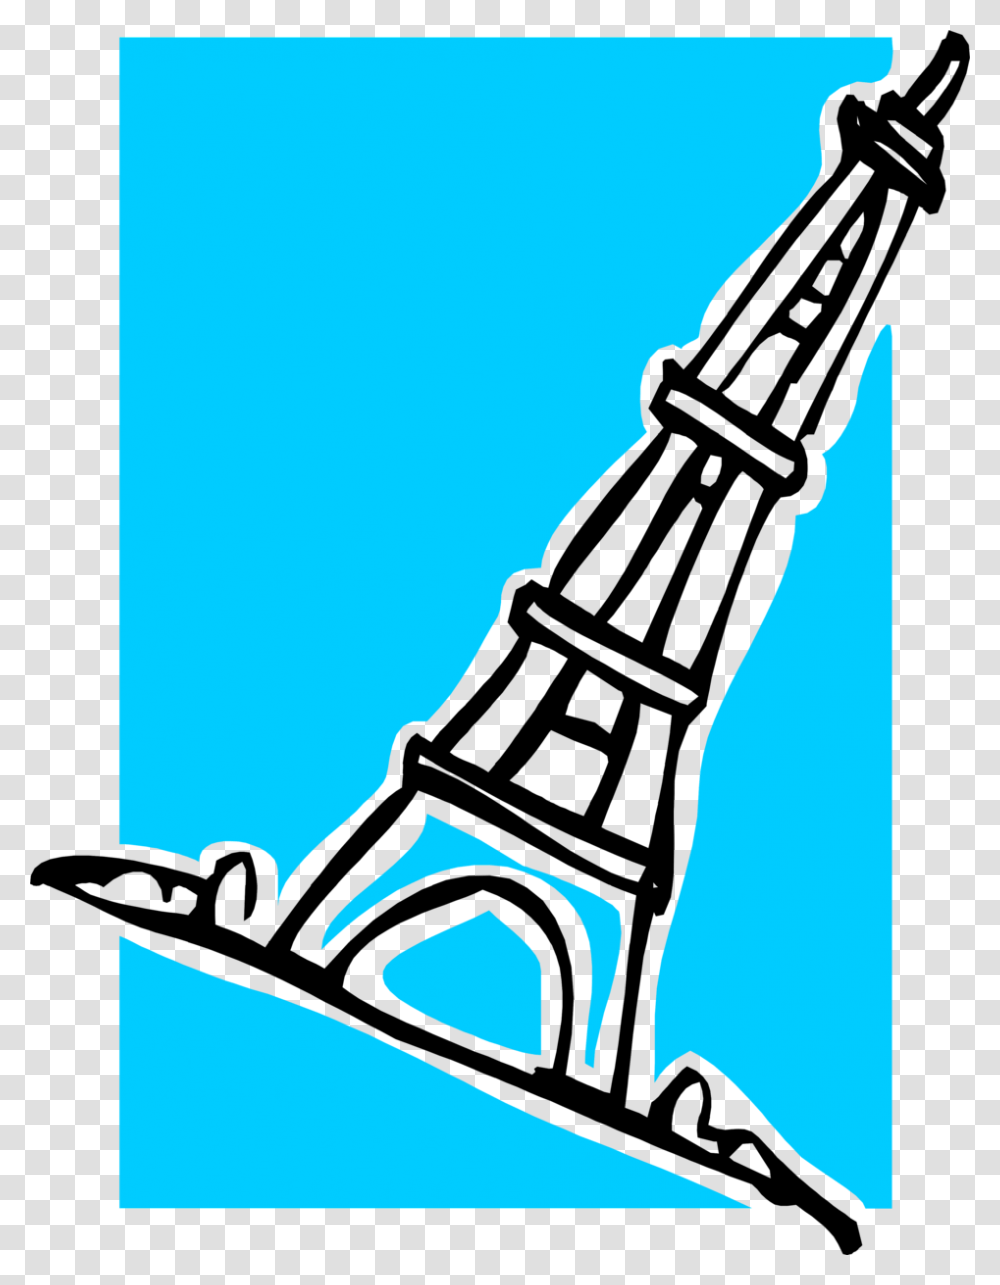 Eiffel Tower Free Stock Photo Illustration Of The Eiffel Tower, Person, Sport, Silhouette, Vacuum Cleaner Transparent Png